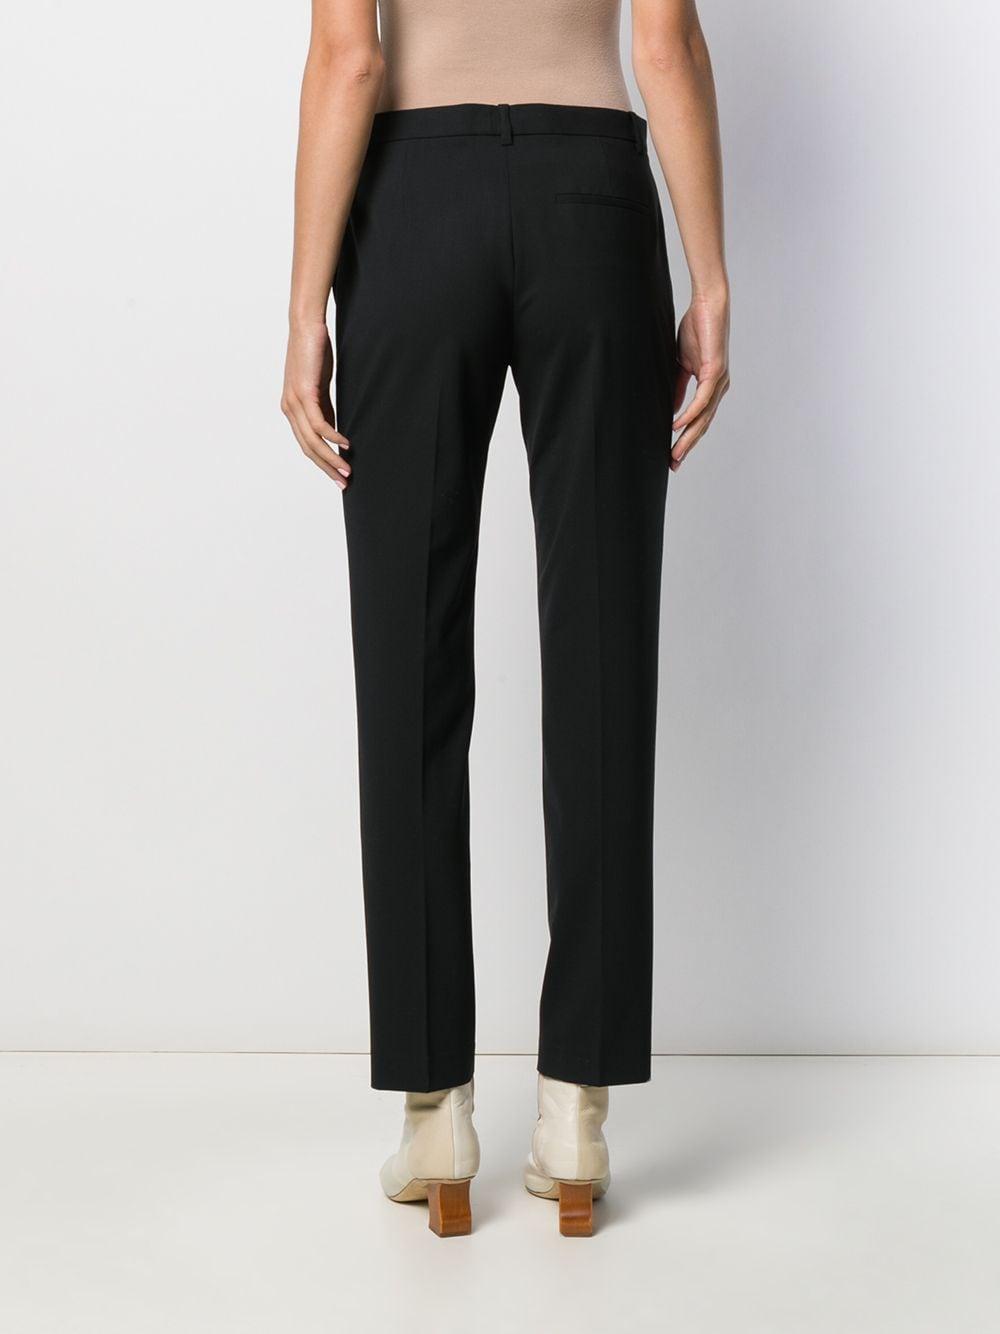 Theory Wool High Rise Tailored Trousers in Black - Lyst